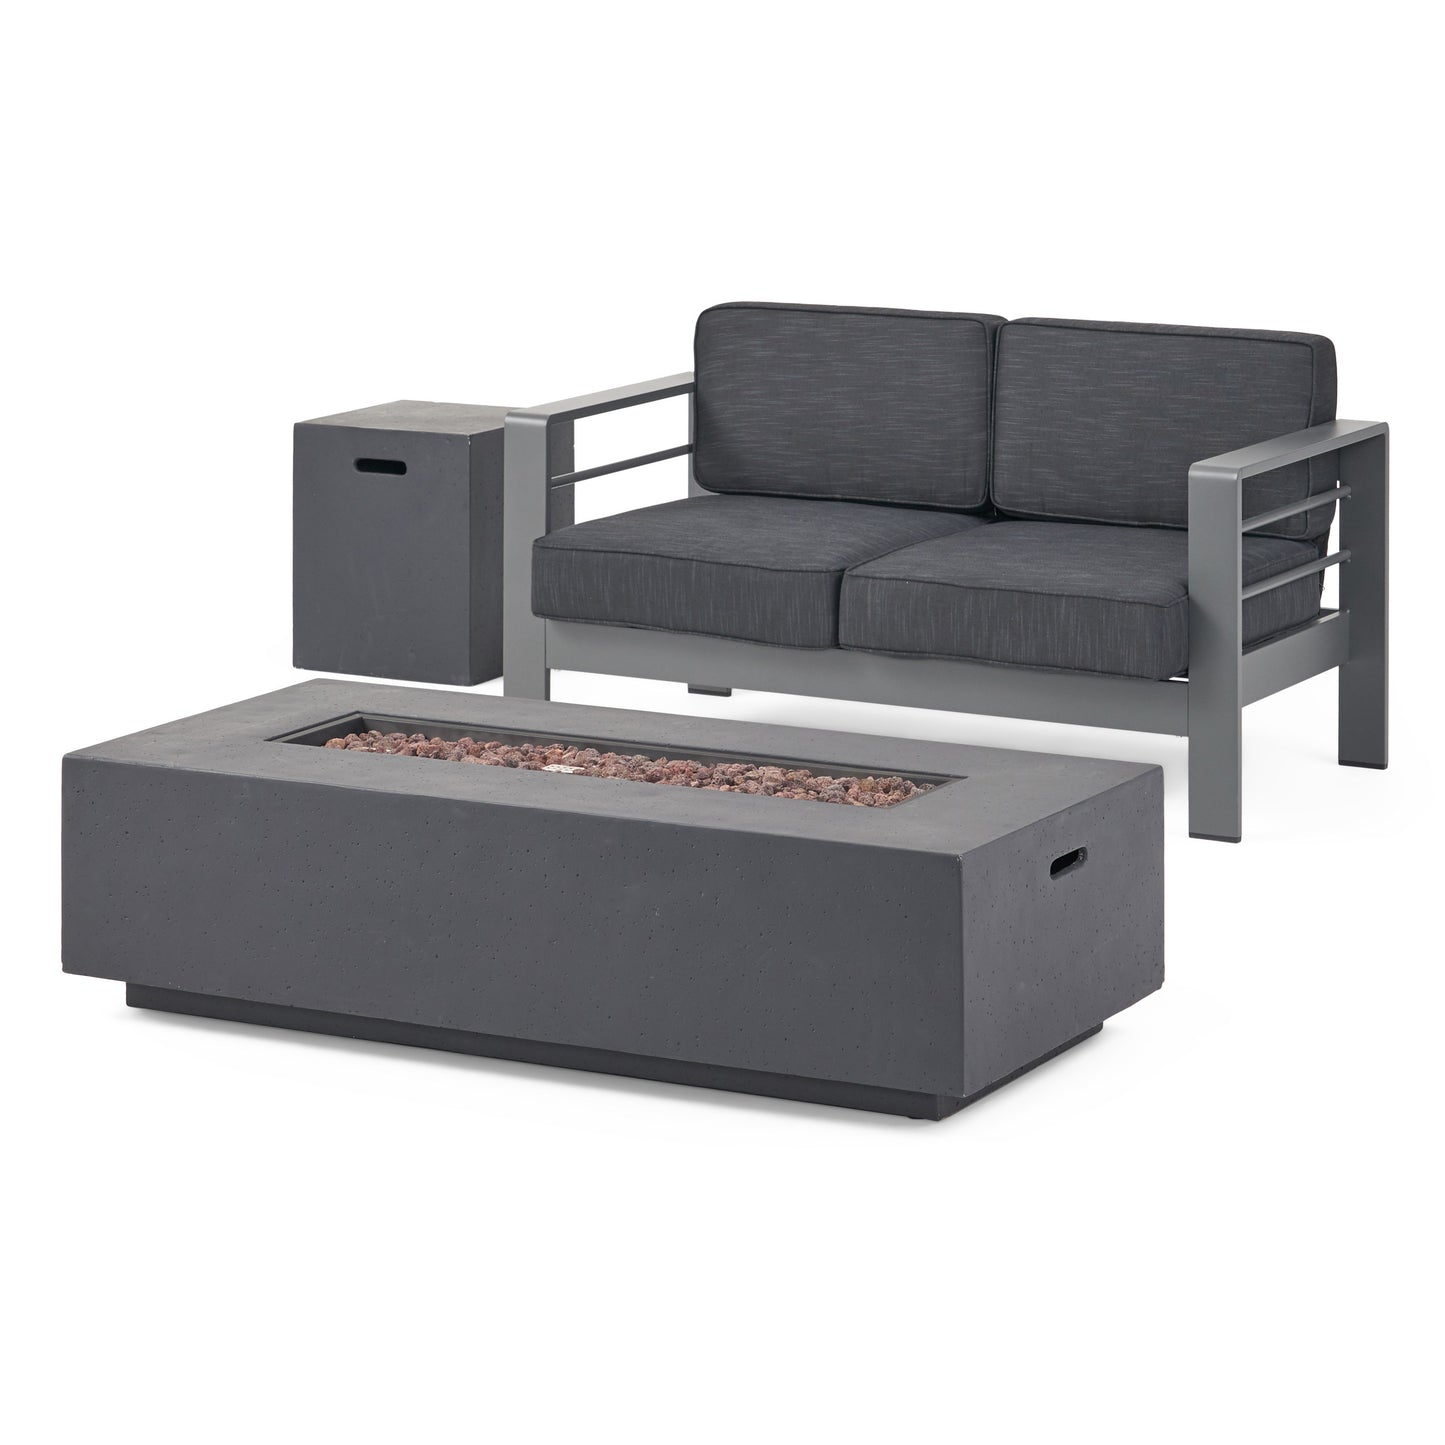 Danae Coral Outdoor Loveseat and Fire Pit Set